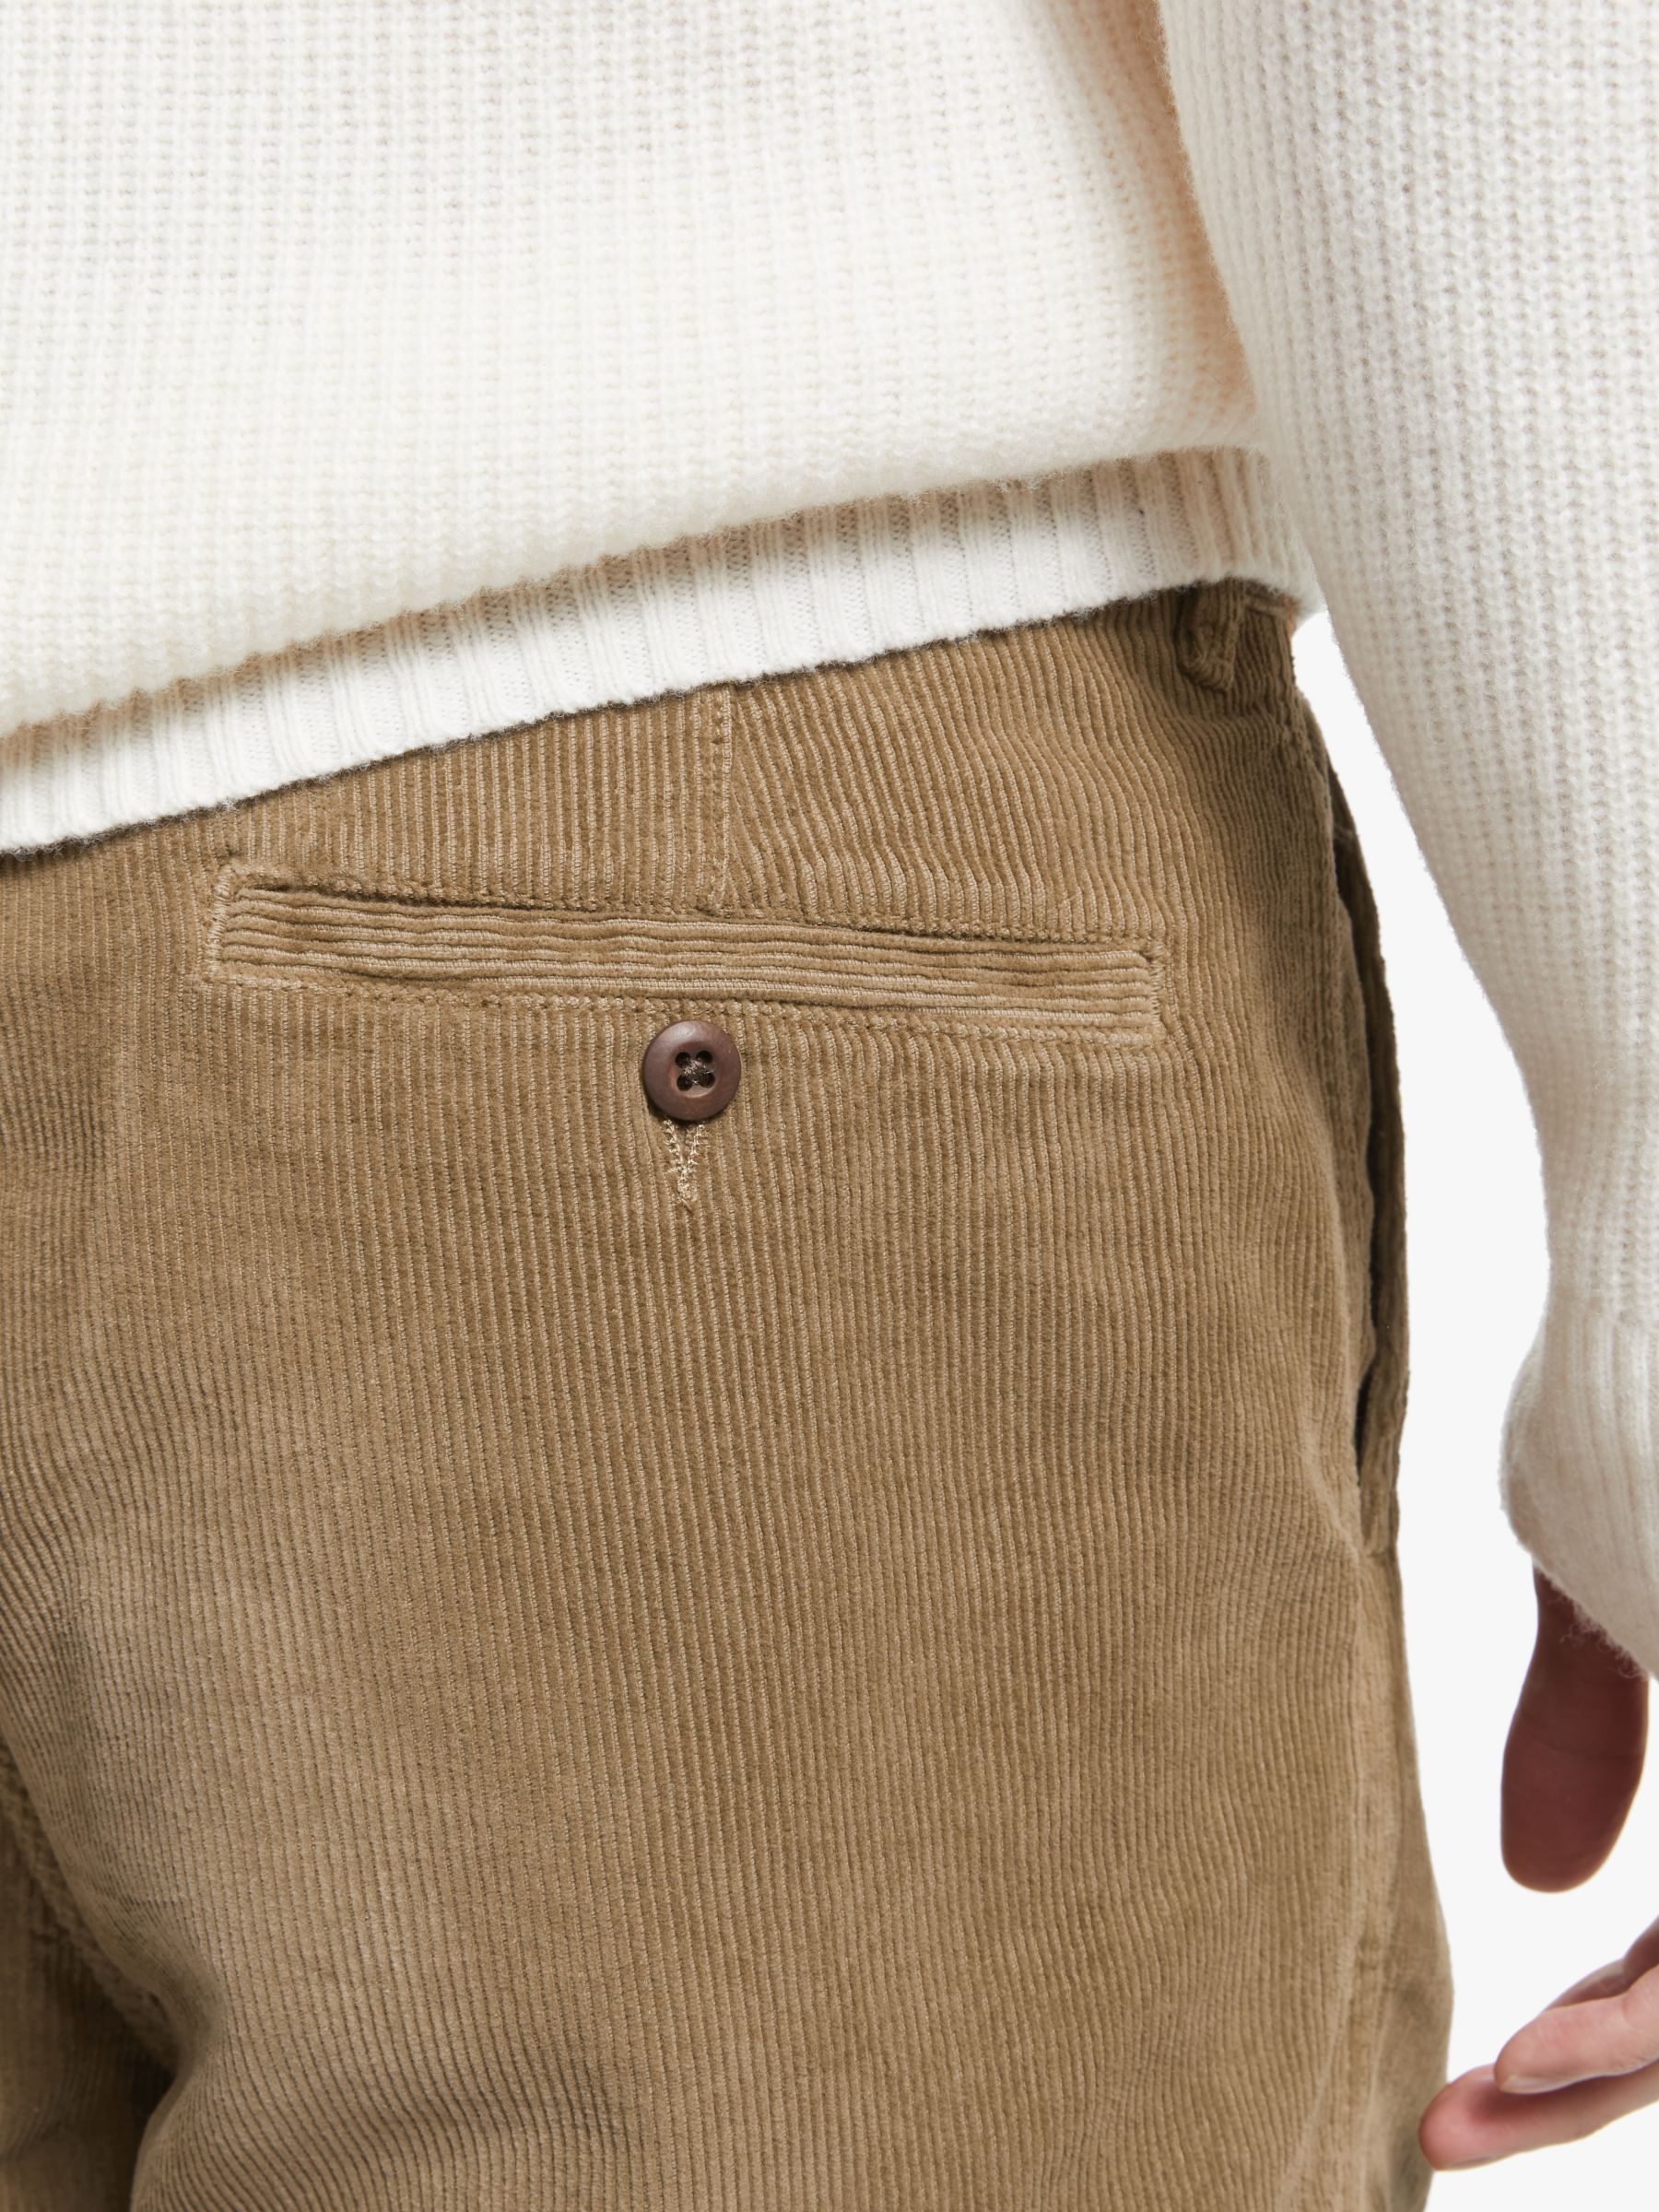 pleated front corduroy mens trousers